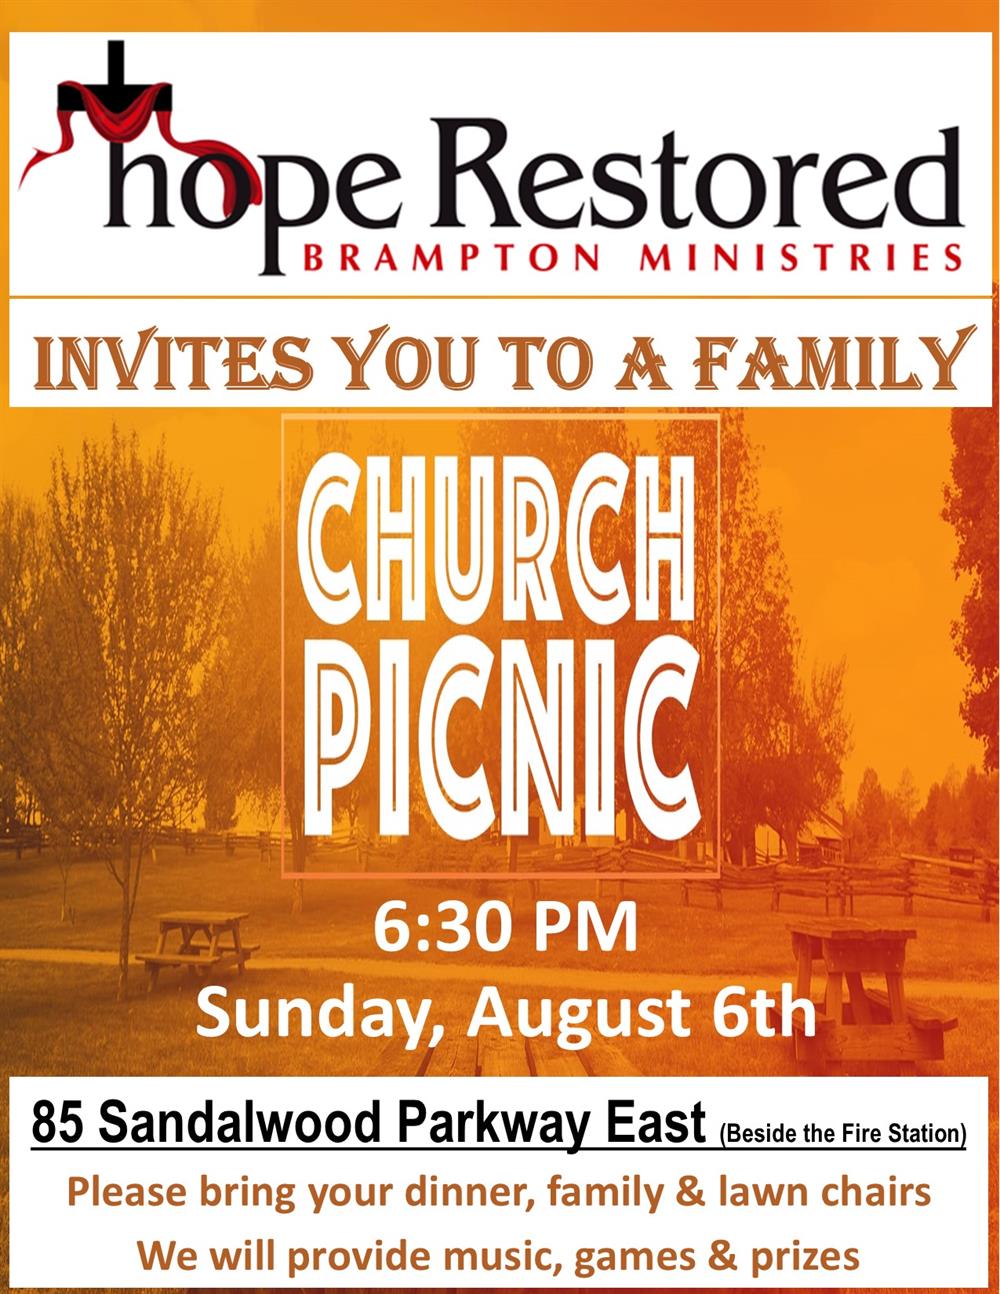 Saturday August 5th Family Picnic